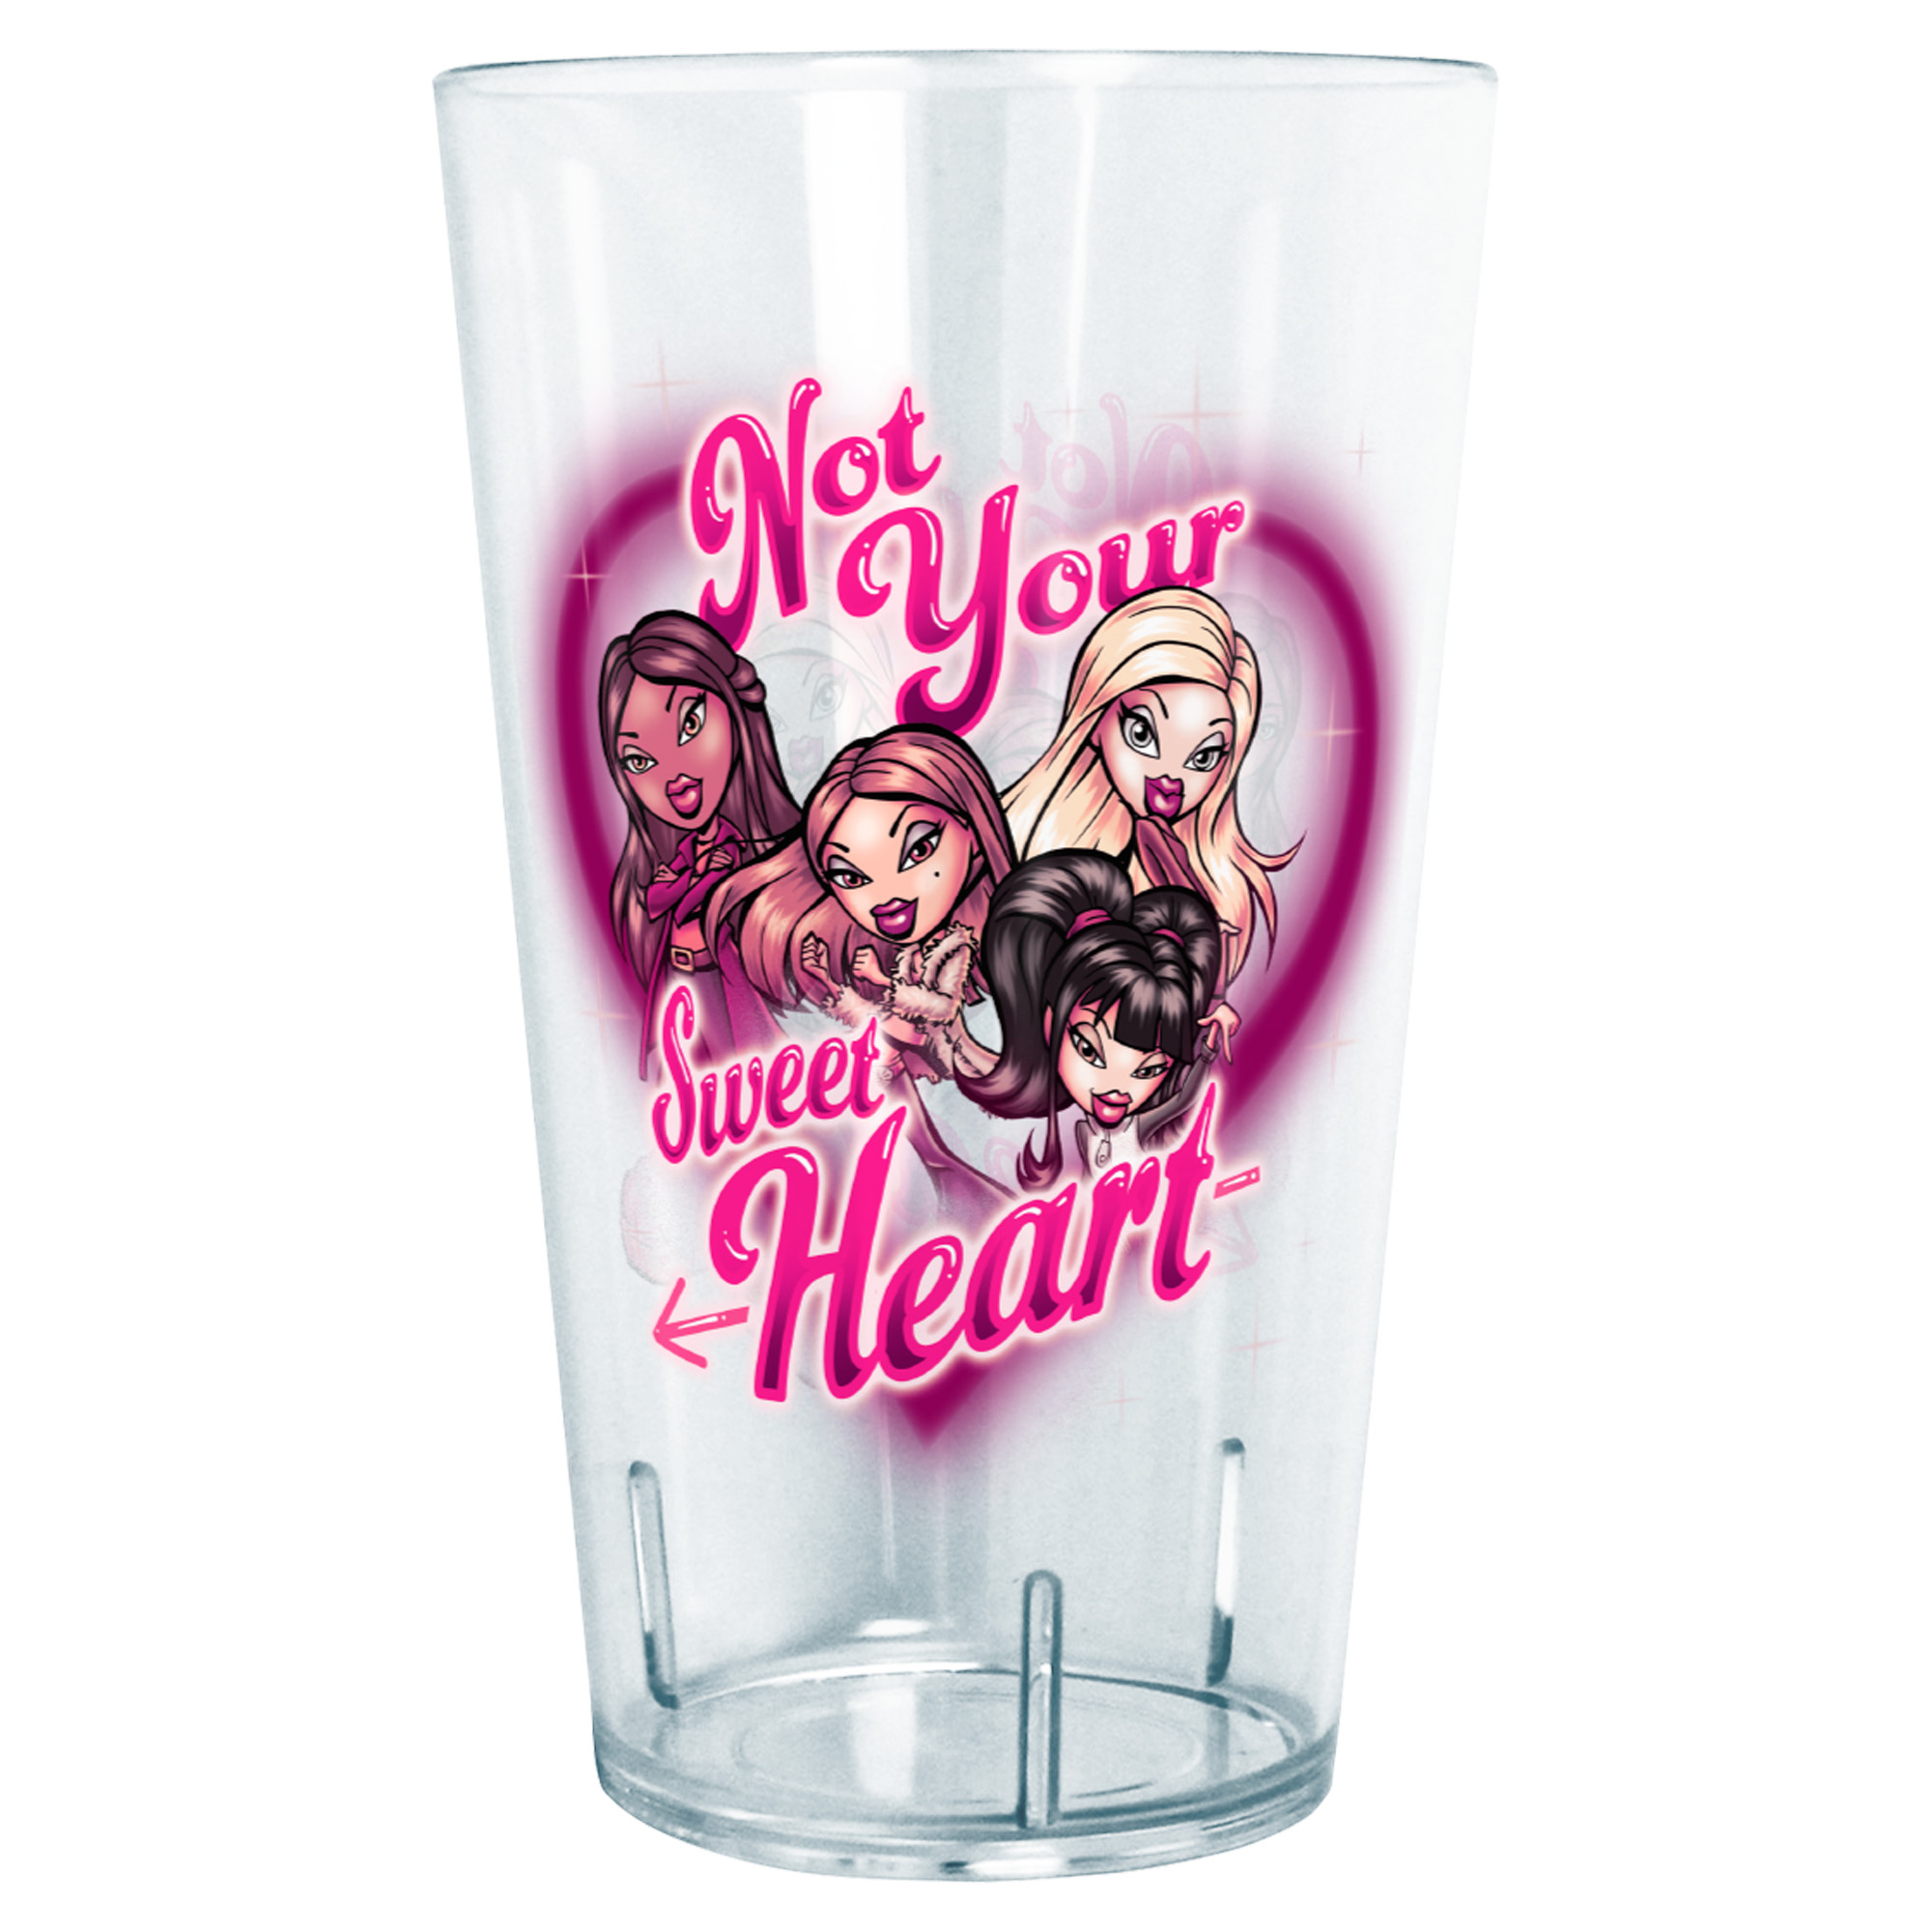 BRATZ 24 oz. Not Your Sweetheart Plastic Cup - CLEAR